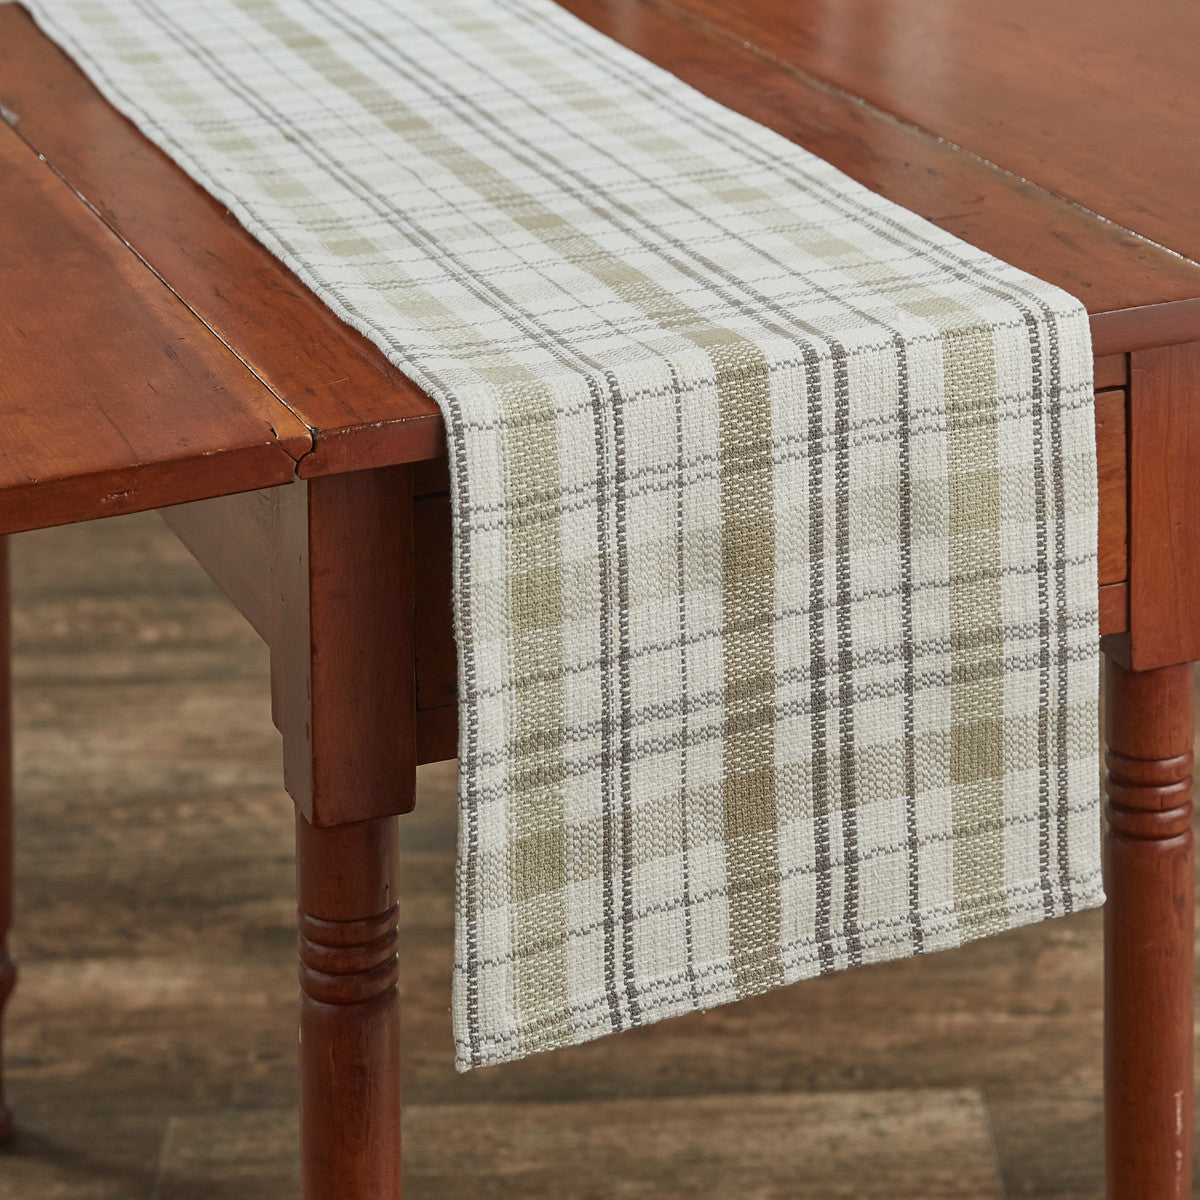 In The Meadow Plaid Table Runner 54"L Set of 2  Park Designs